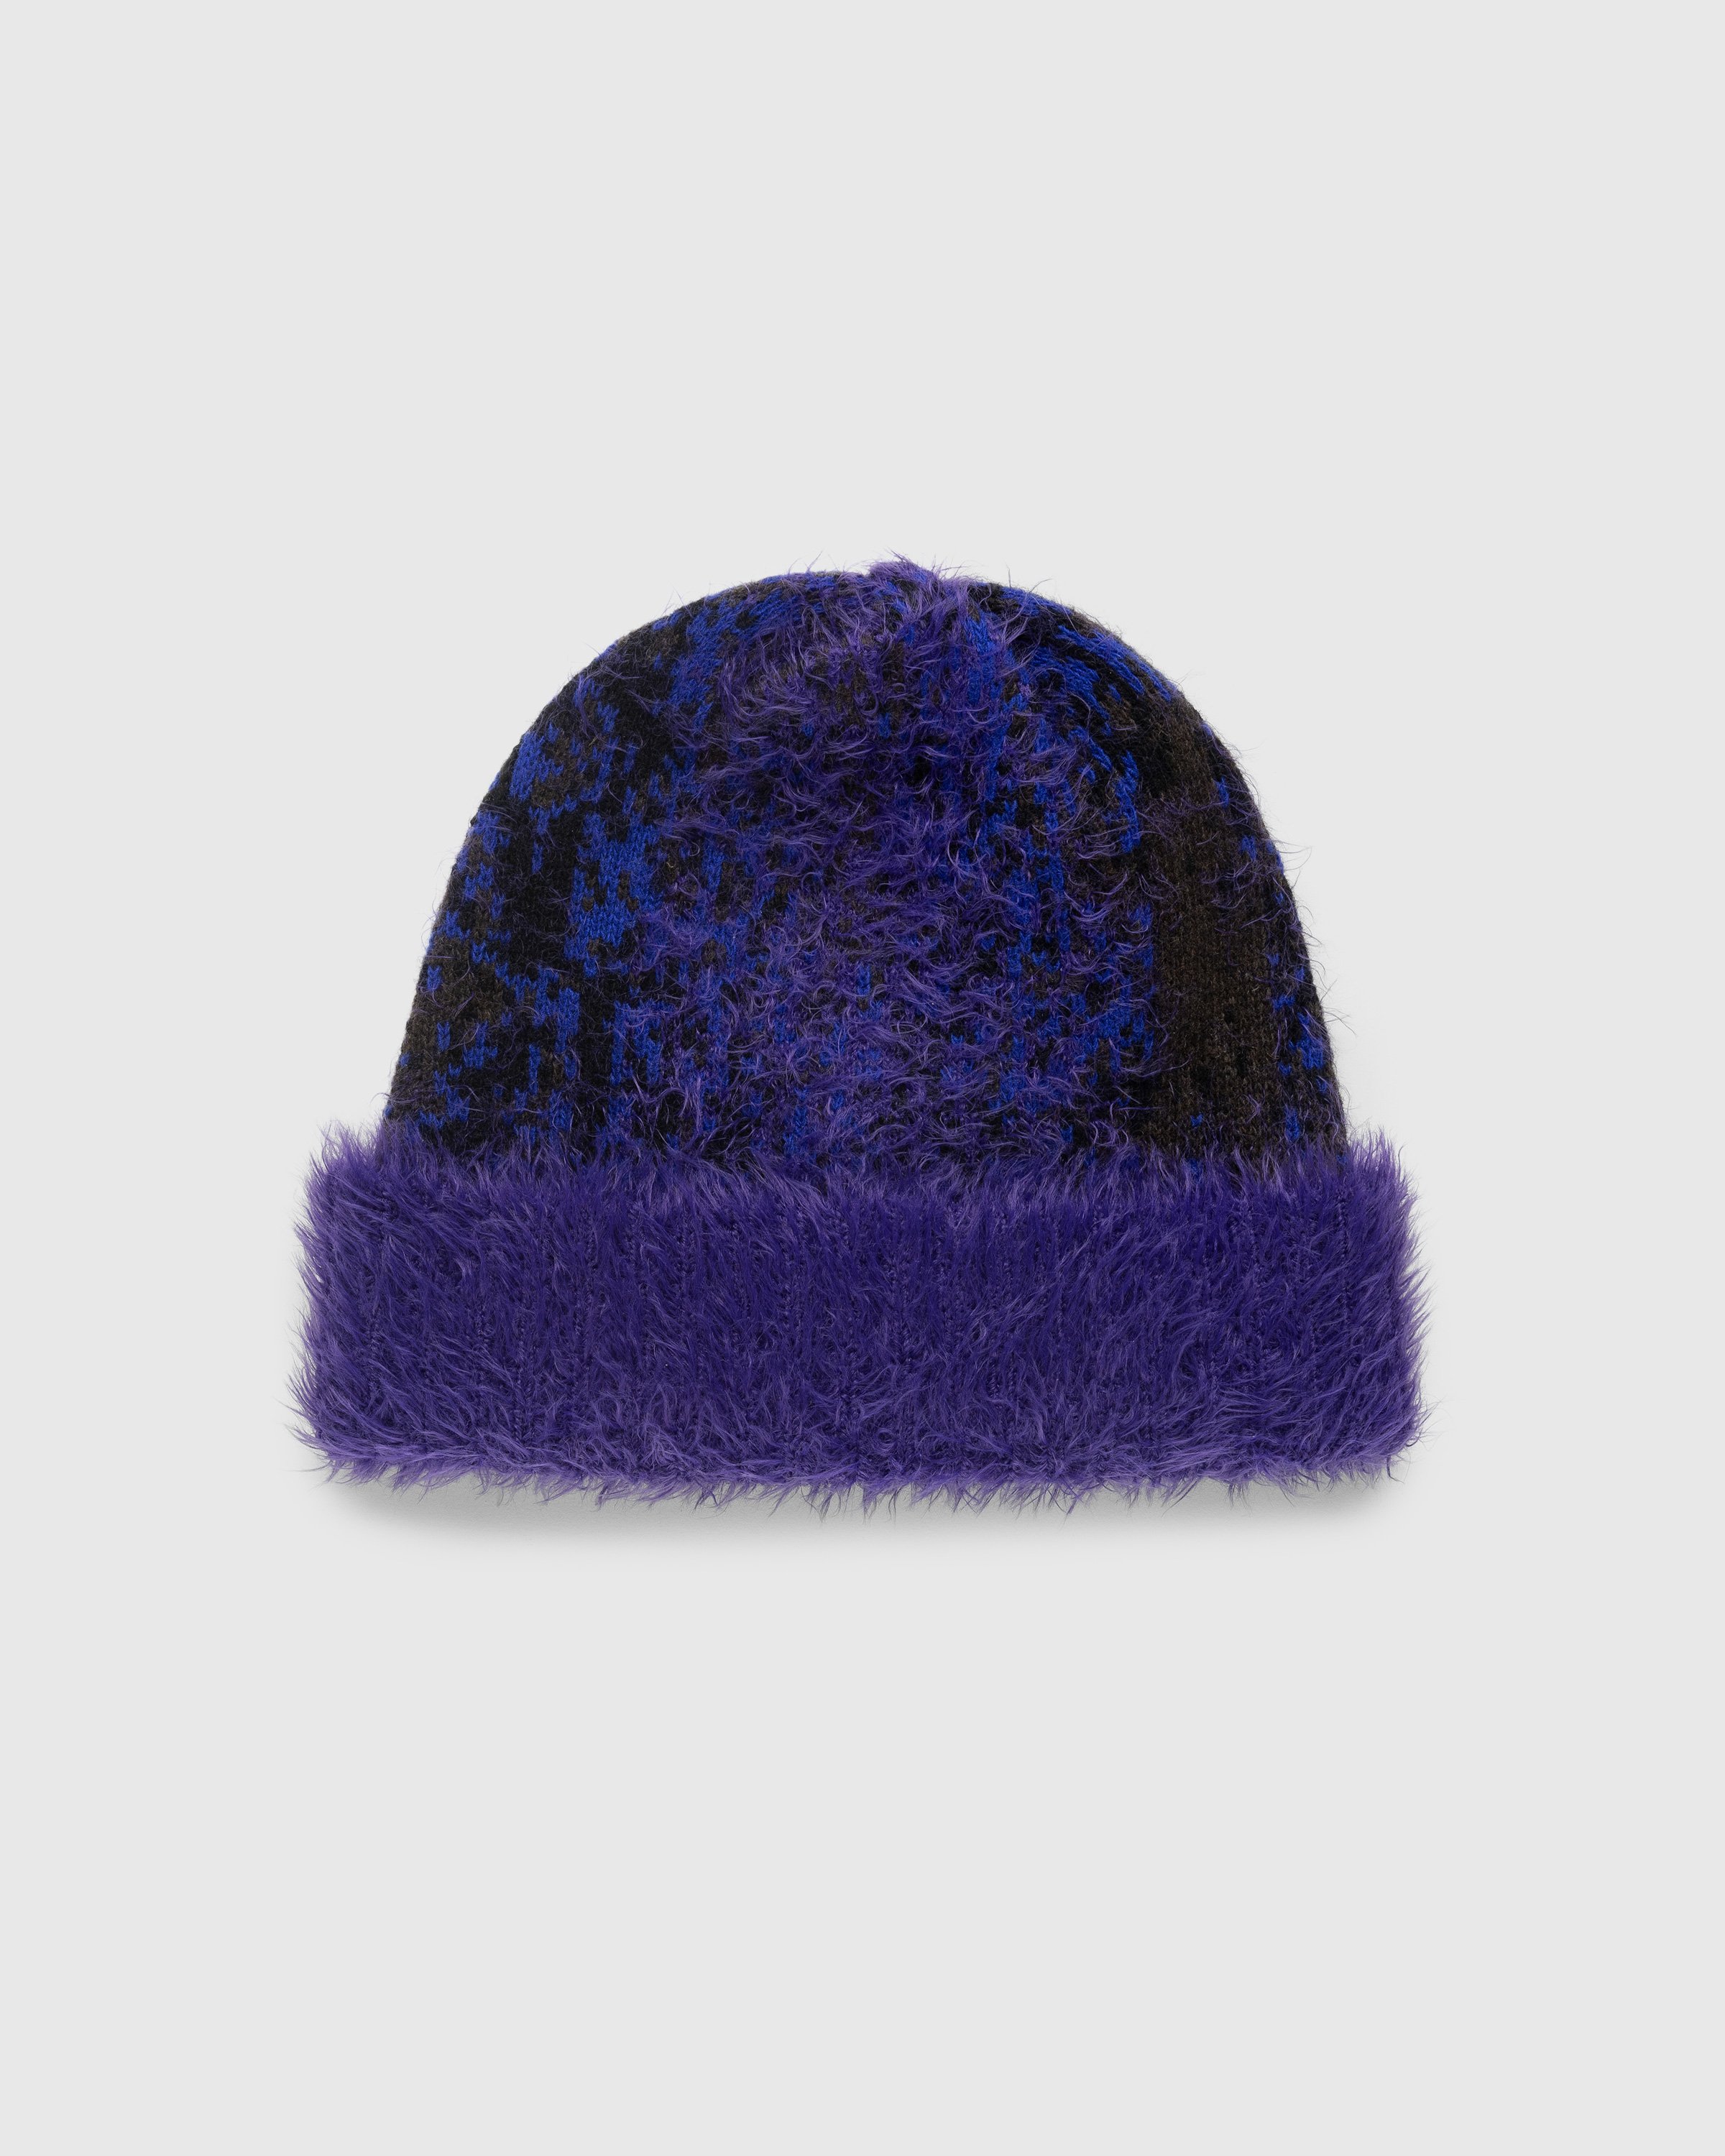 Y/Project - Gradient Hairy Knit Beanie Purple/Blue/Brown - Accessories - Multi - Image 3